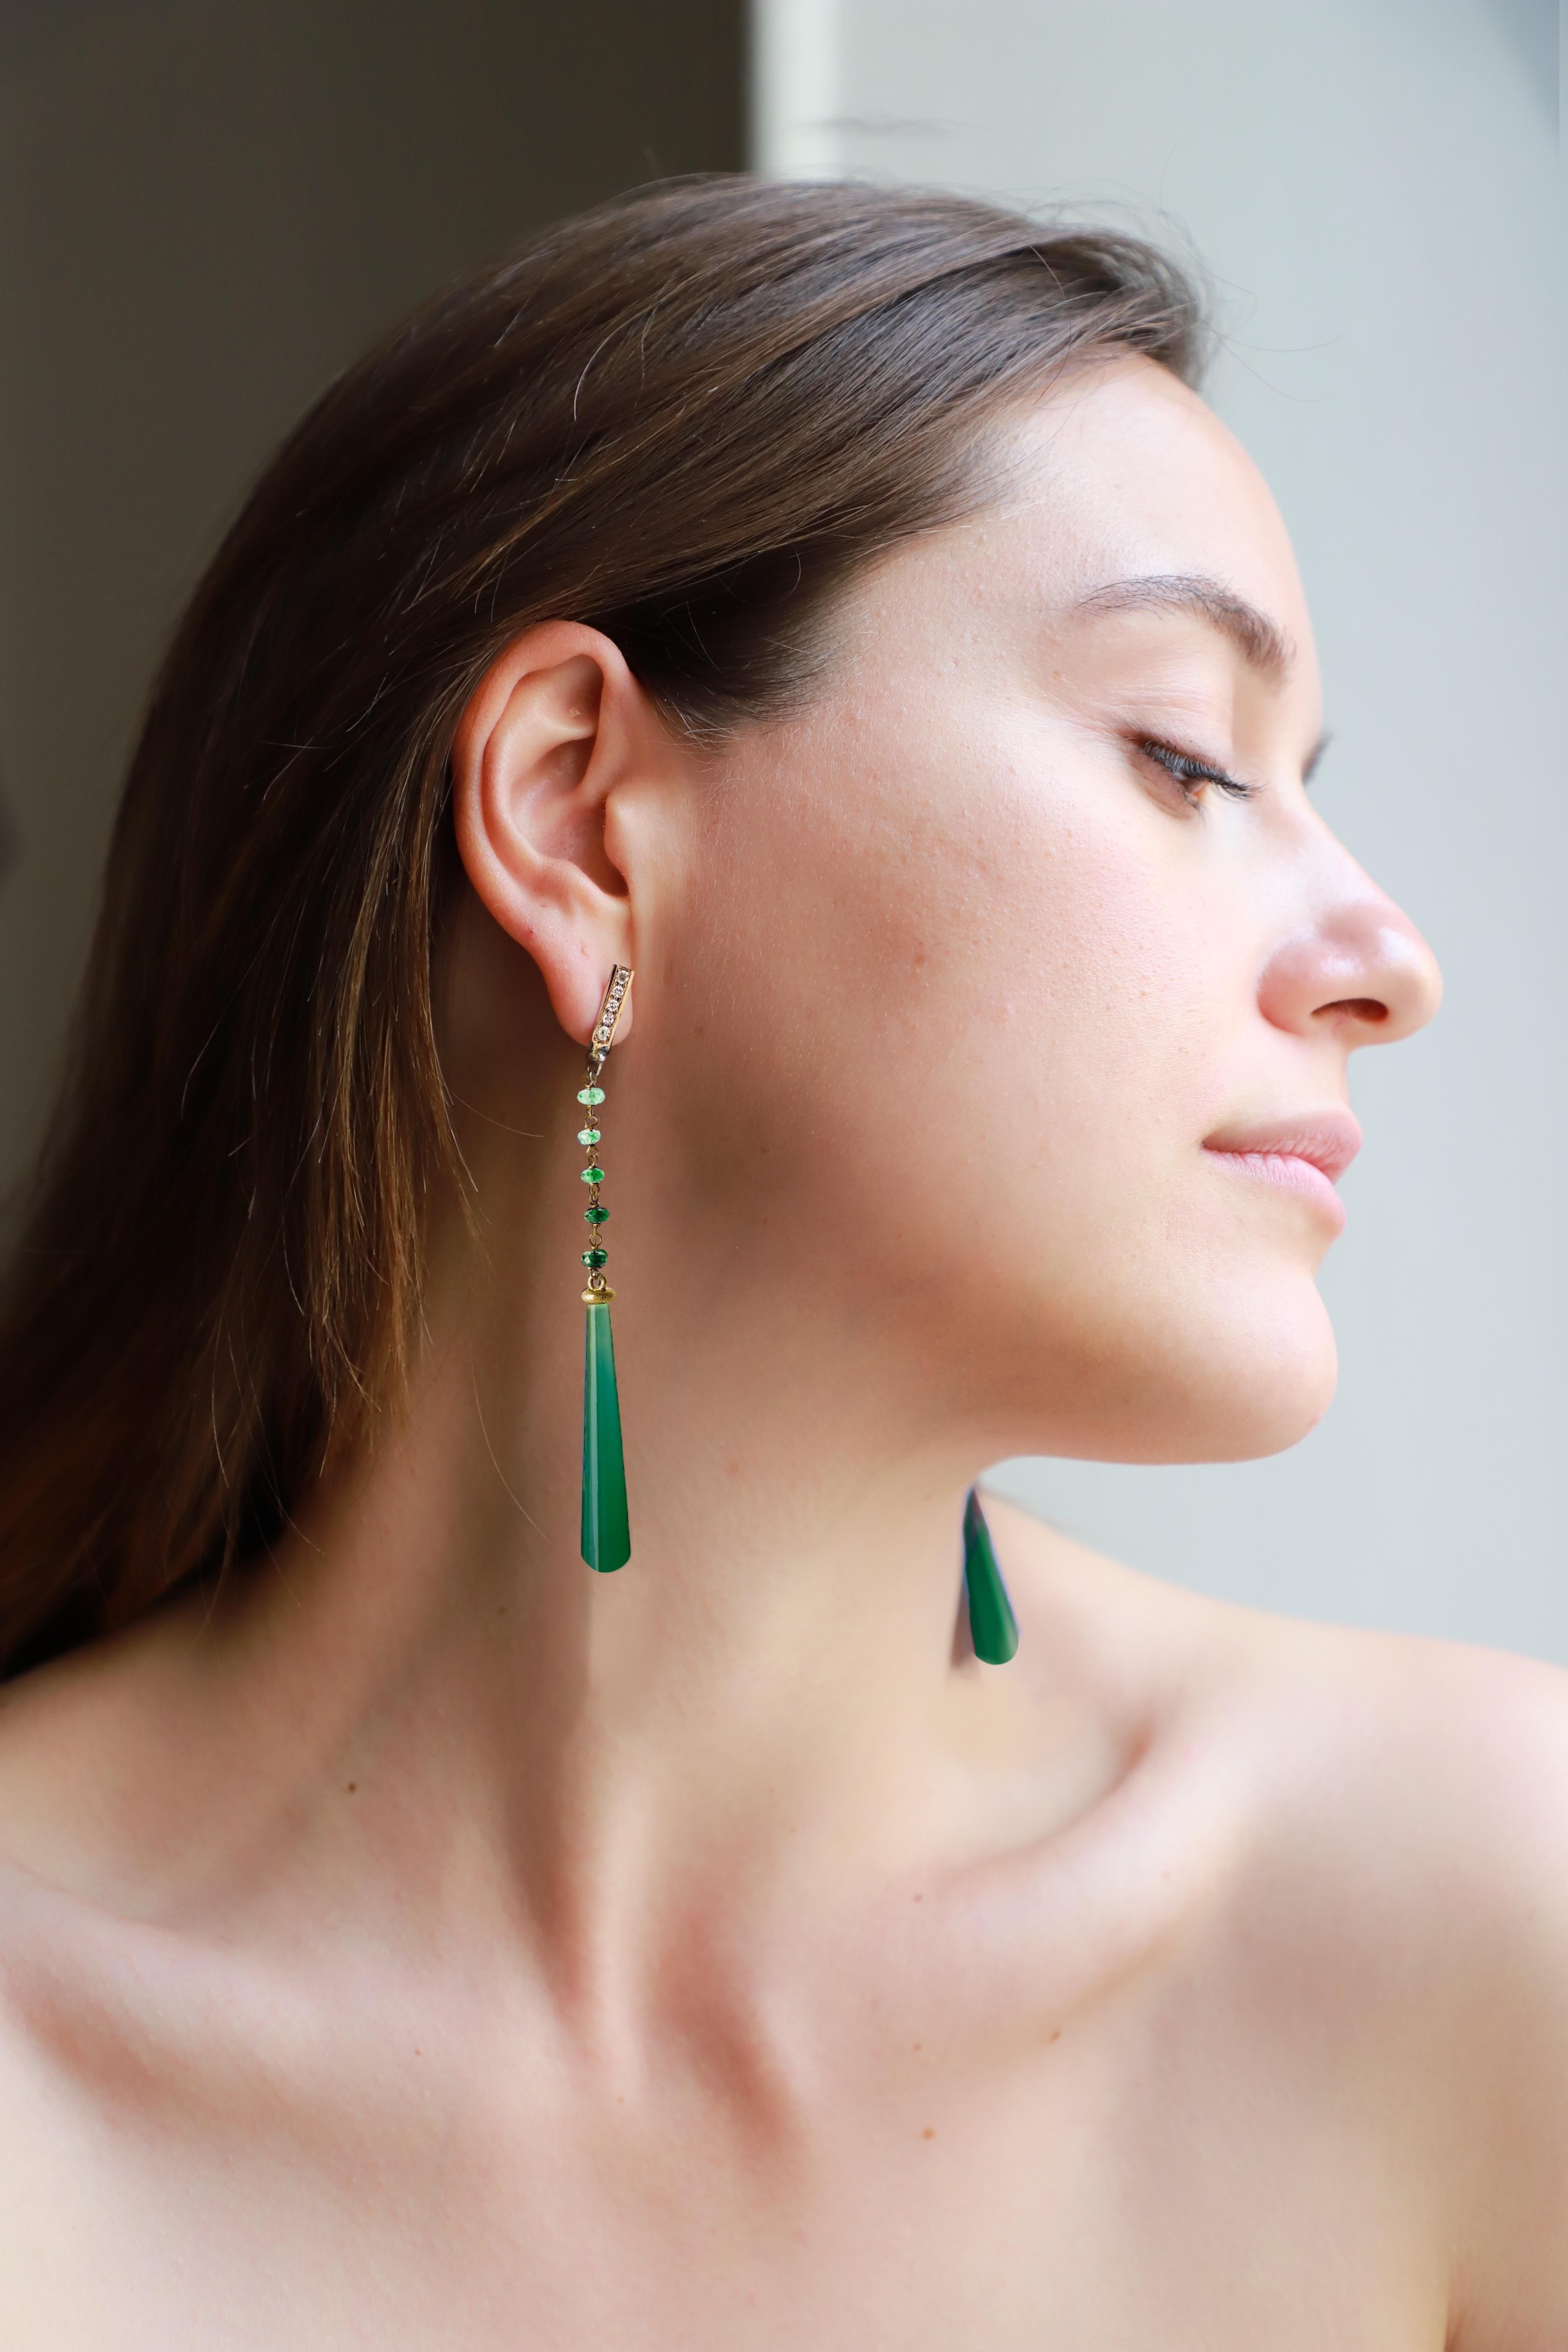 Rossella Ugolini Deco collection, Art Deco Style Green earrings made in 18 karat Gold, 0.30 karat Gray Diamond 0.40 Emerald and Agate Drops Dangle Earrings. 
A geometric shape characterized by its elegant sinuosity, femininity and delicacy. 